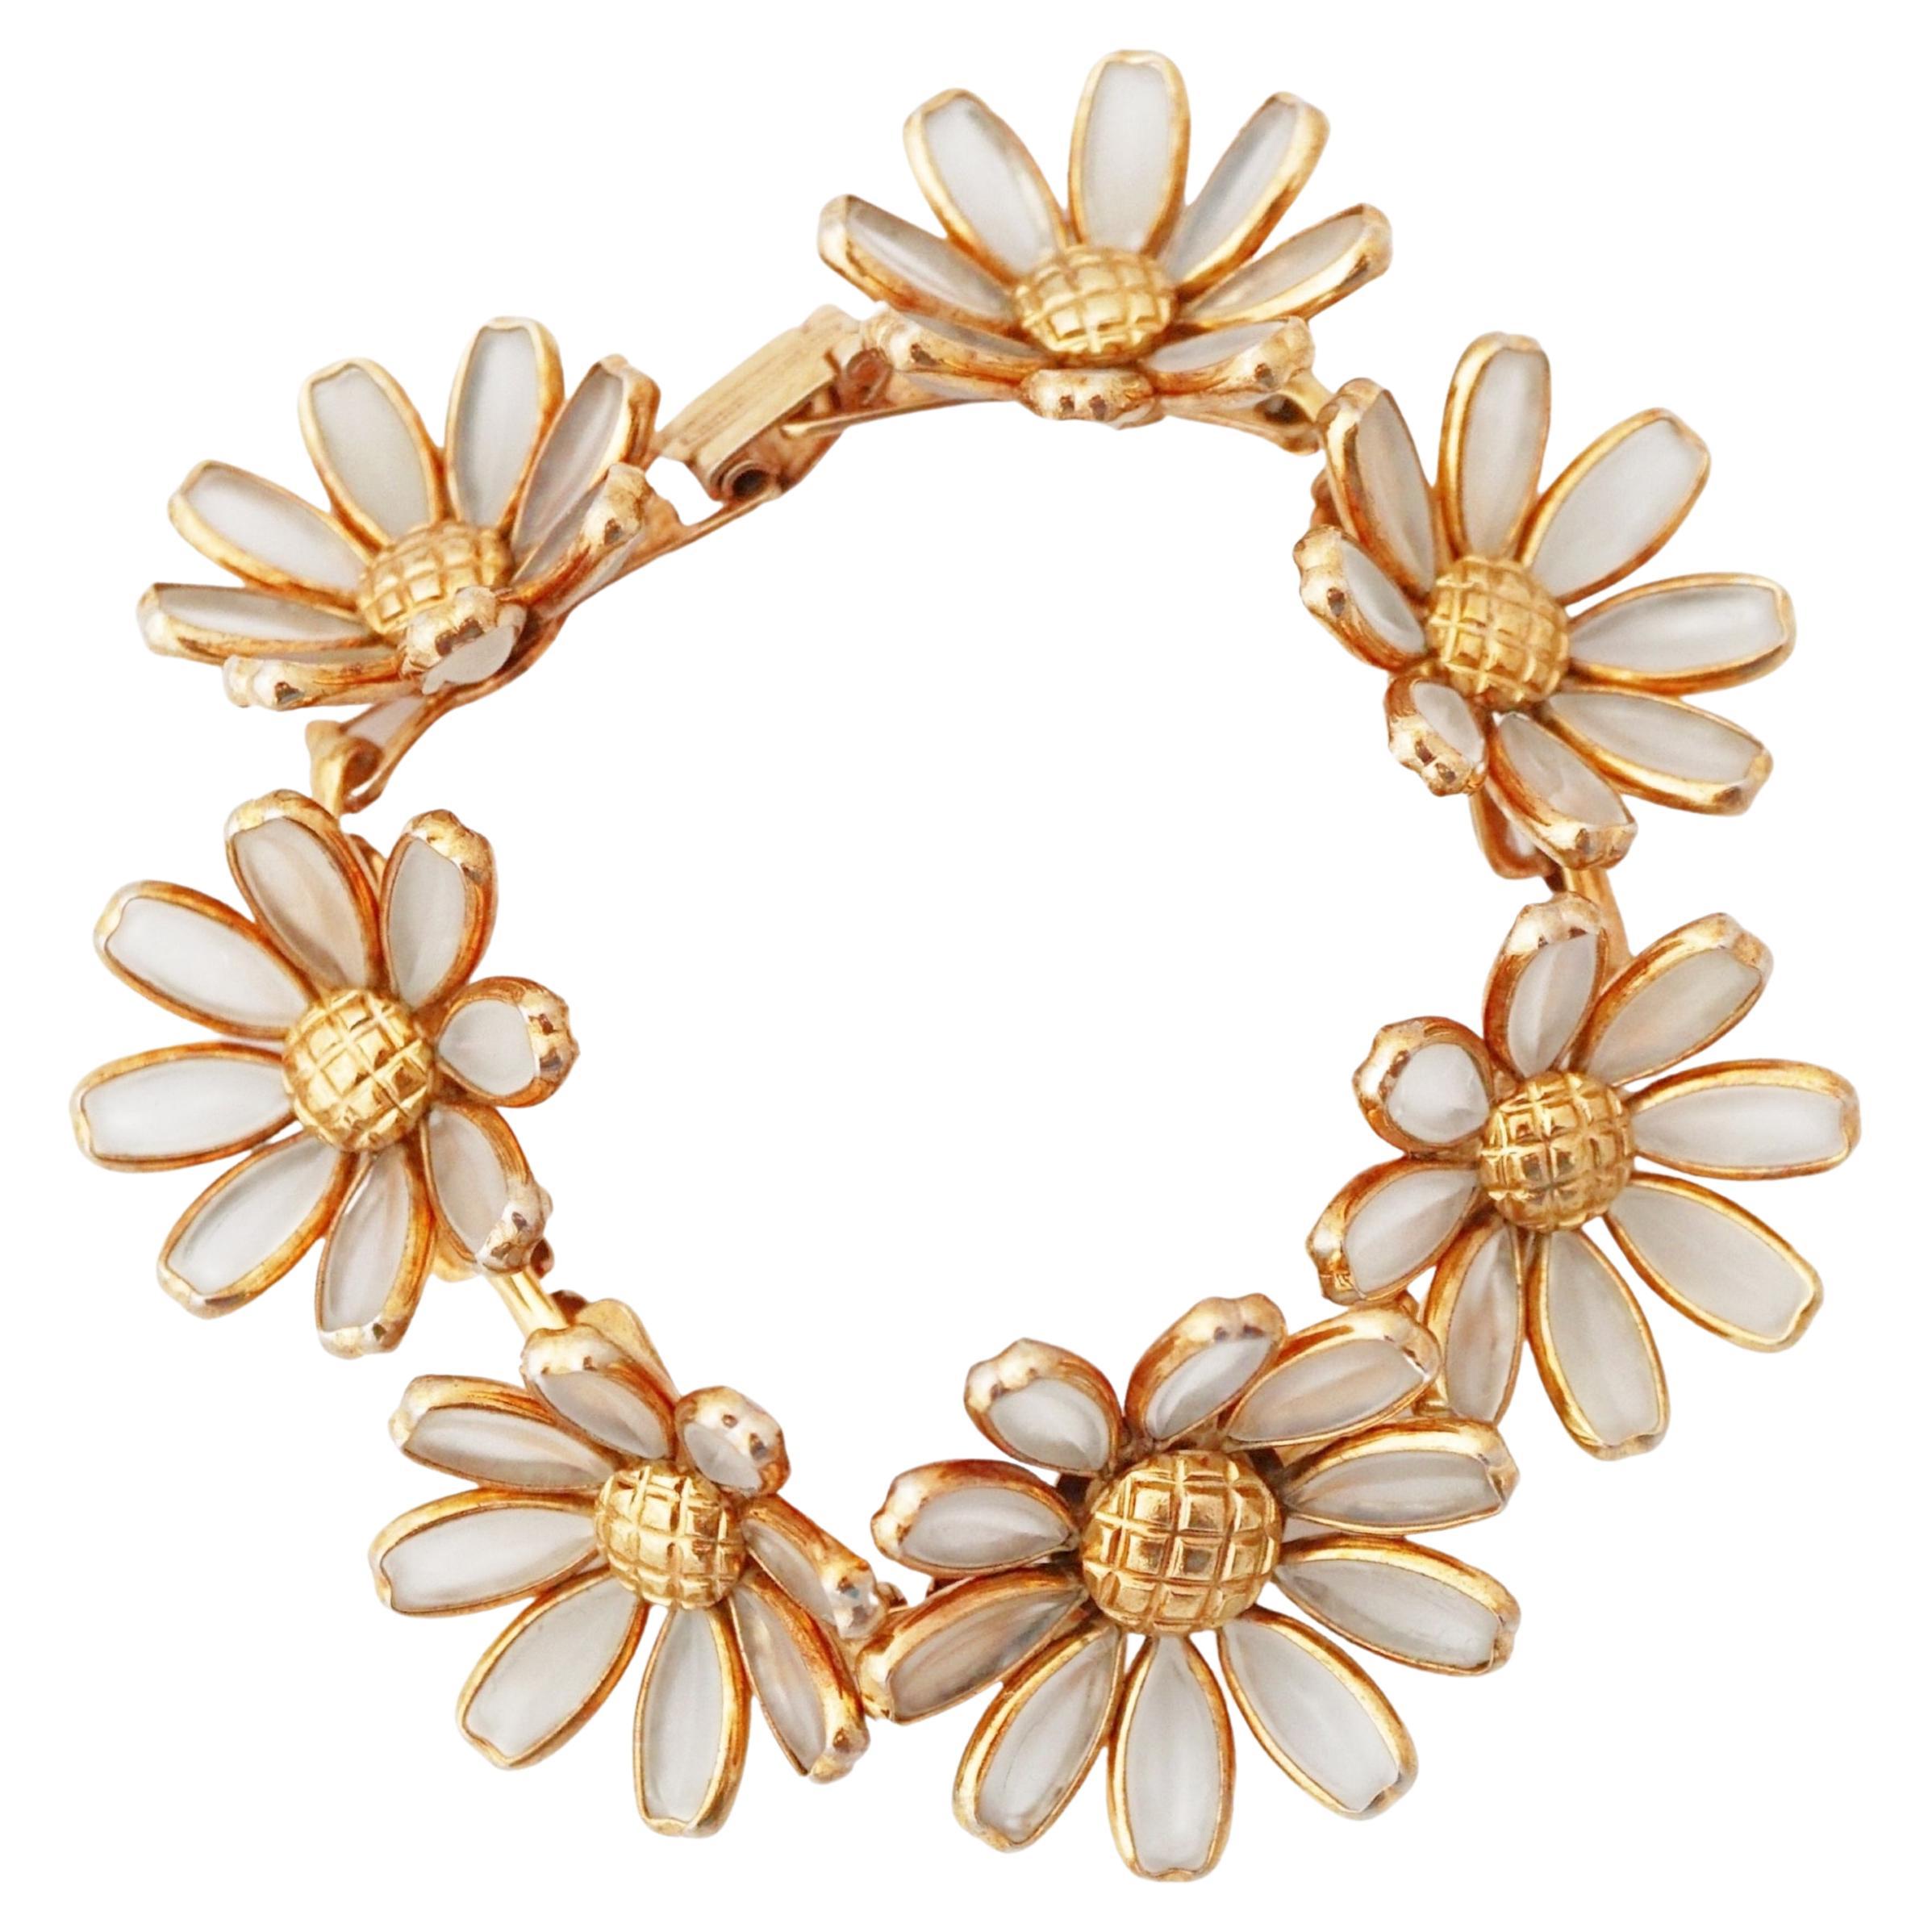 Daisy Flower Link Poured Frosted Glass Bracelet By Crown Trifari, 1950s